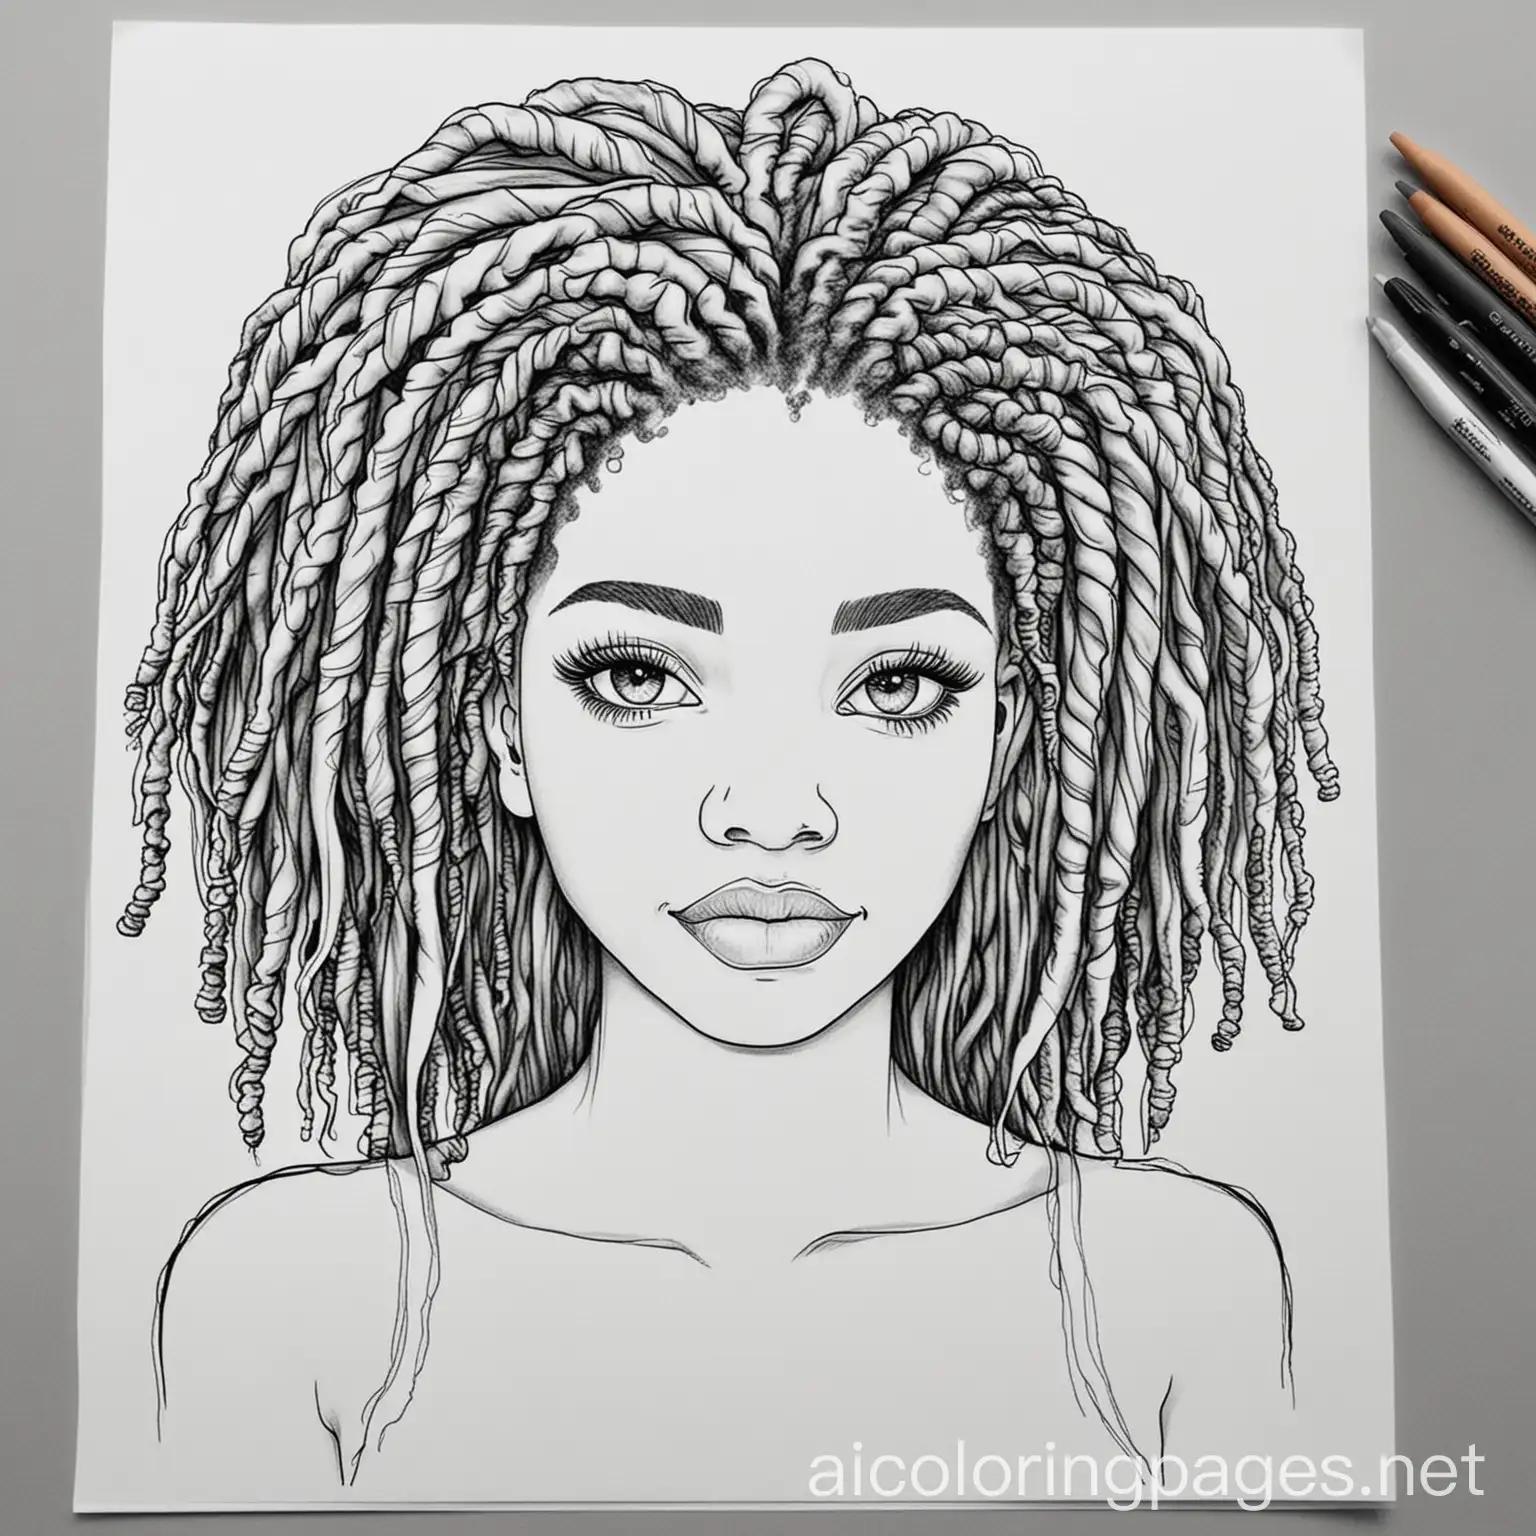 Pretty light skinned Black woman with Locs, Coloring Page, black and white, line art, white background, Simplicity, Ample White Space. The background of the coloring page is plain white to make it easy for young children to color within the lines. The outlines of all the subjects are easy to distinguish, making it simple for kids to color without too much difficulty